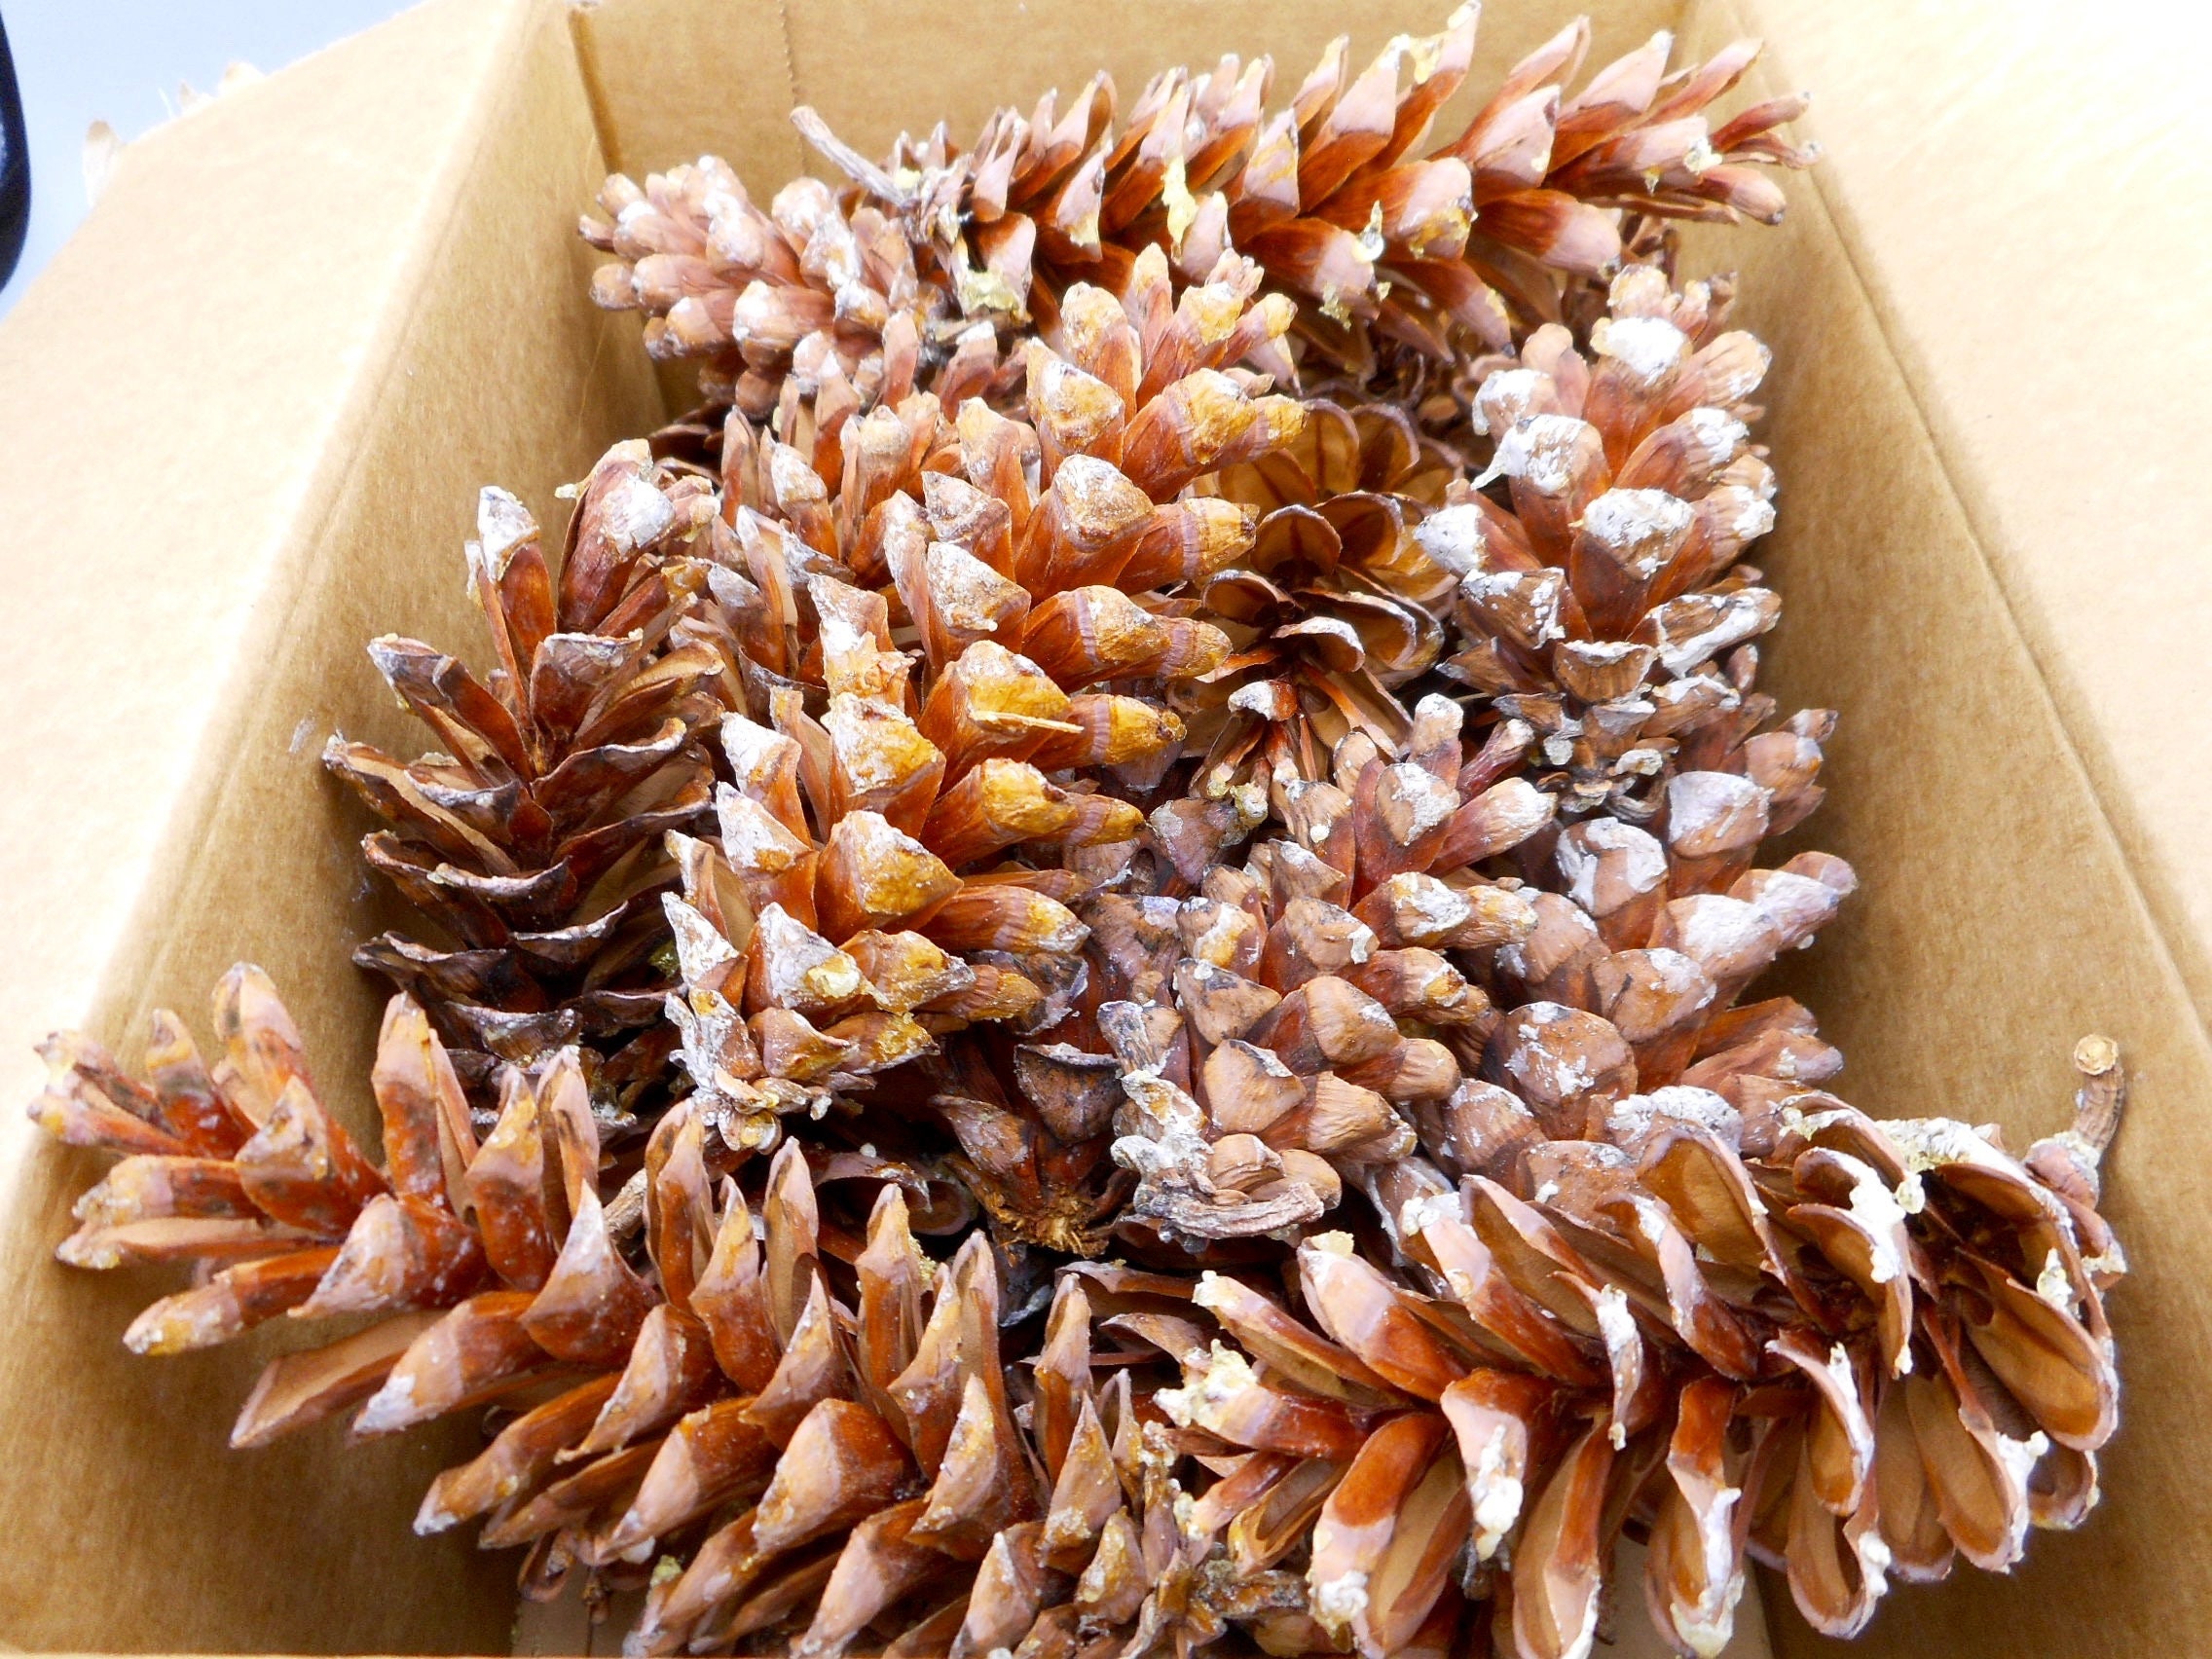 50 Real Pinecones Eastern White Pine Cones Natural Dried Craft Supplies  4~7L - Helia Beer Co